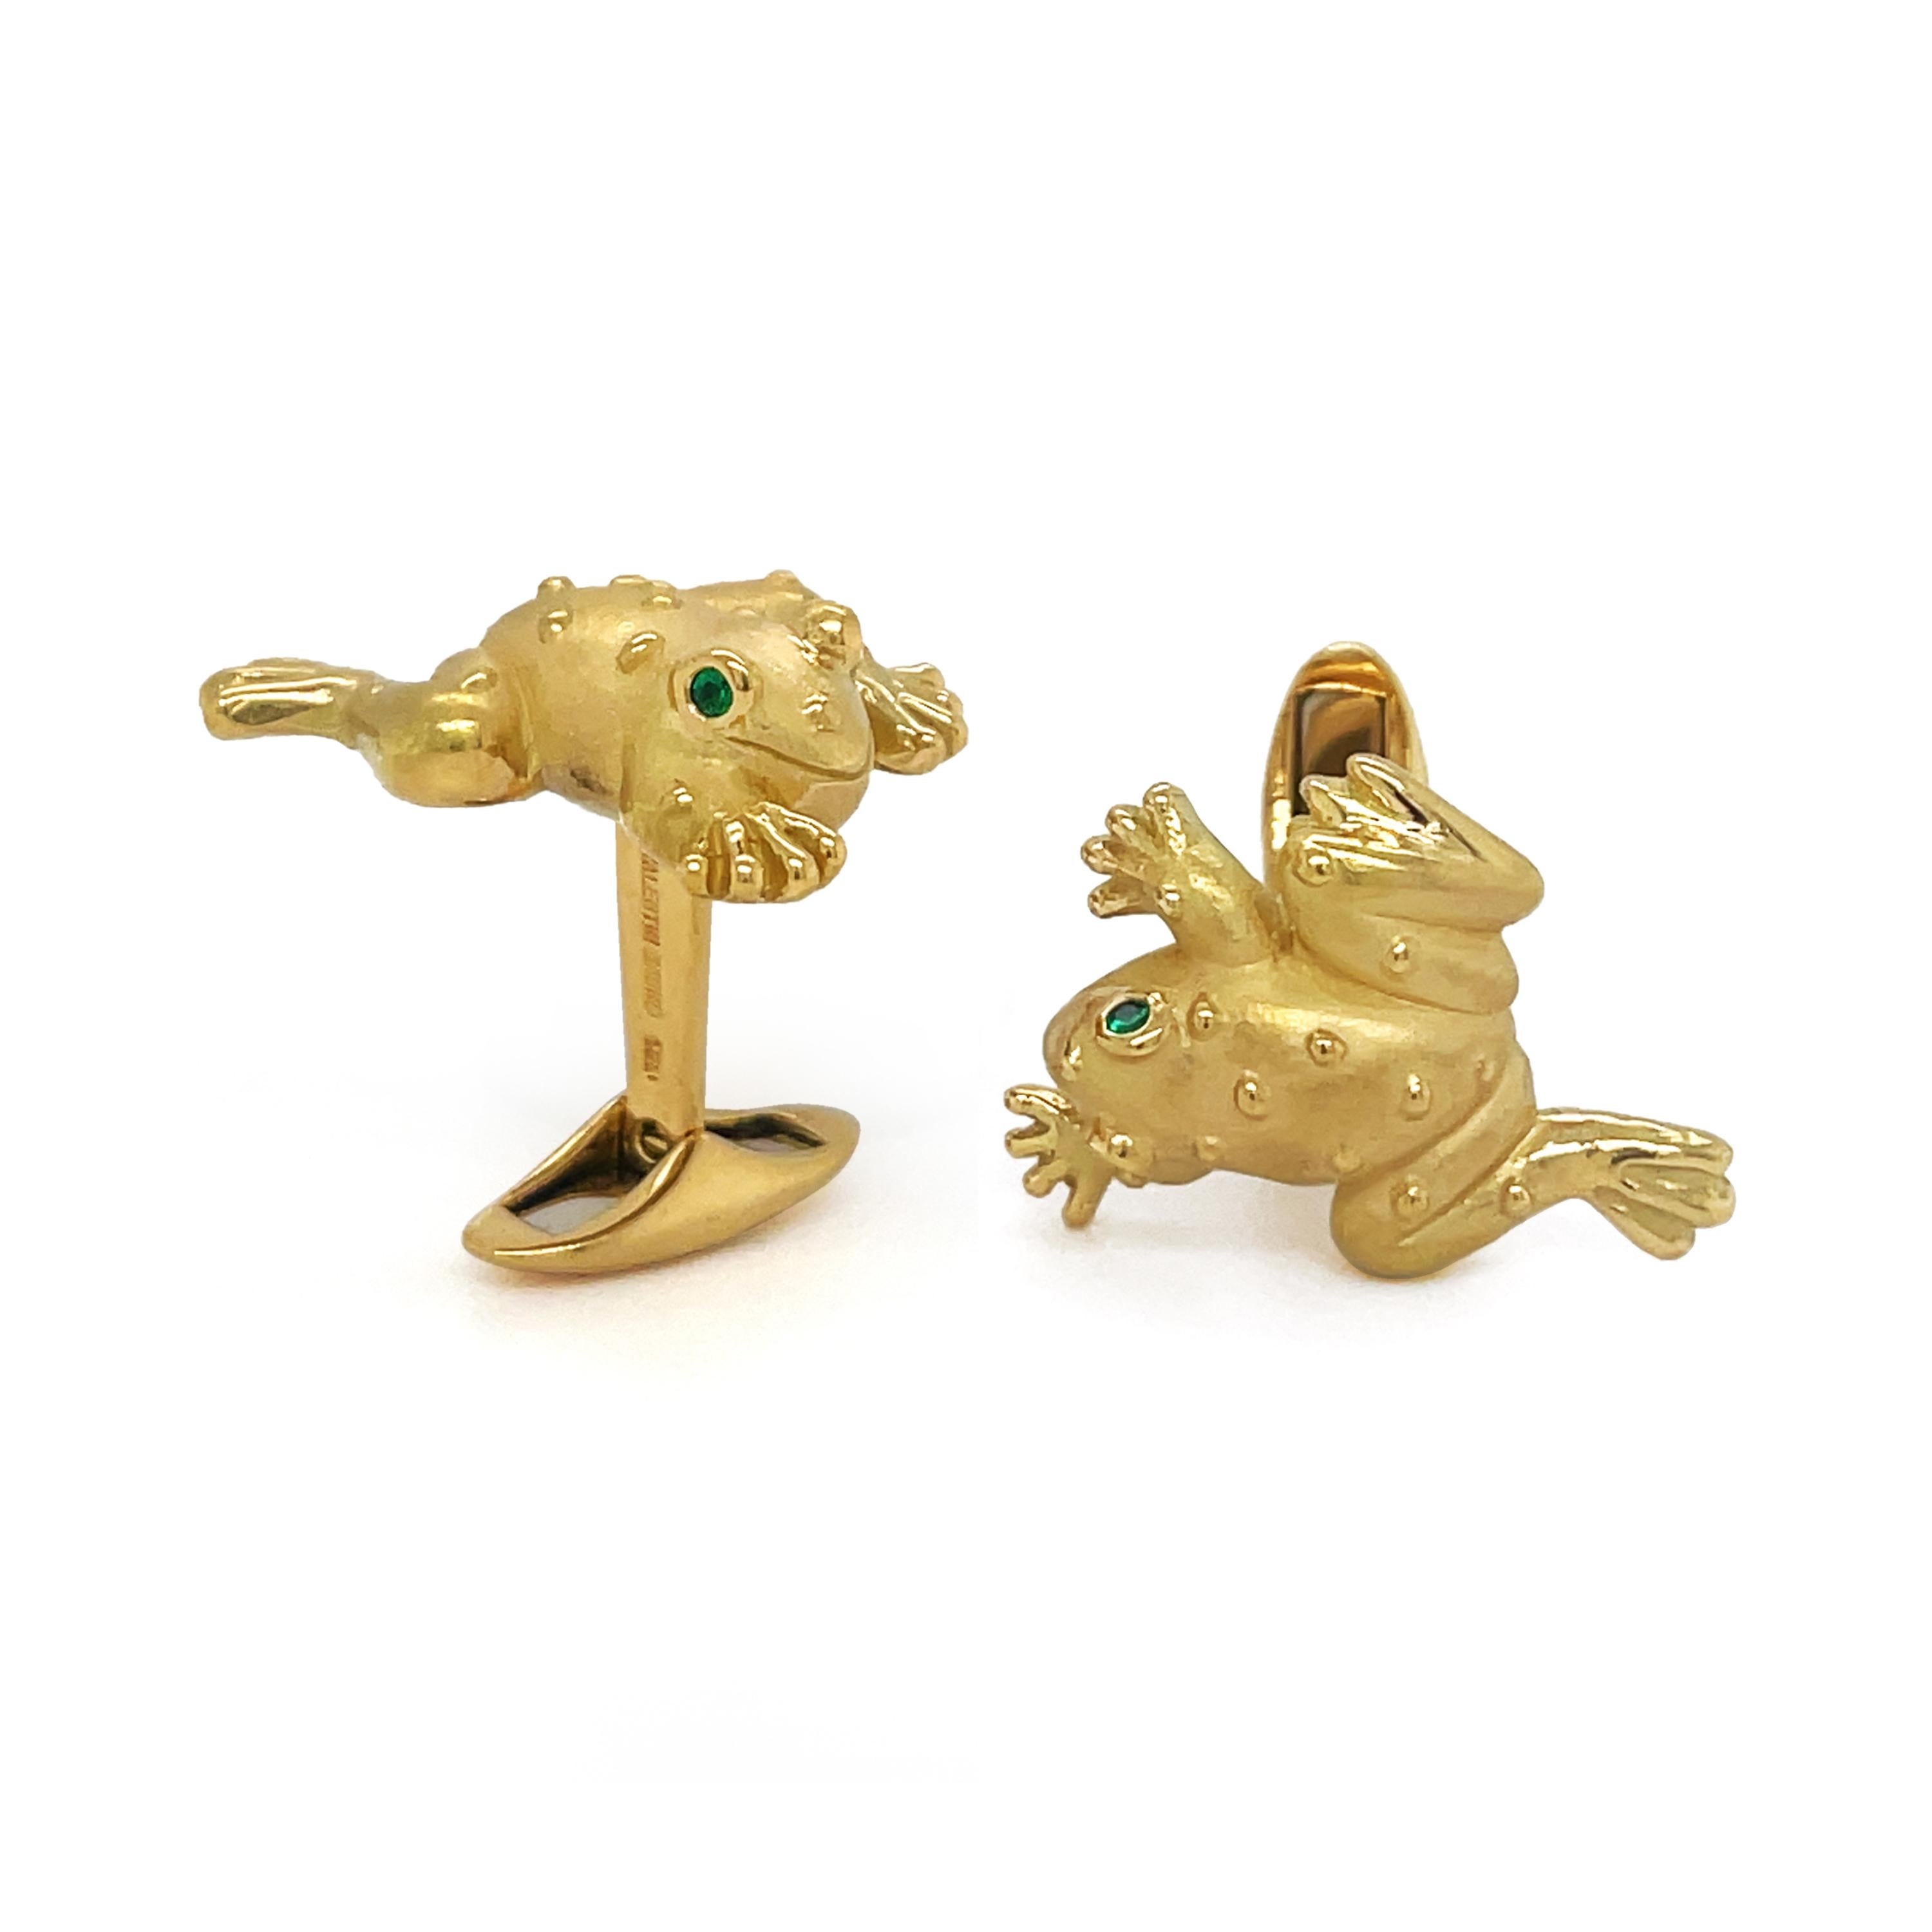 Emerald Cut 18K Yellow Gold Frog Cufflinks with Emerald Eyes For Sale